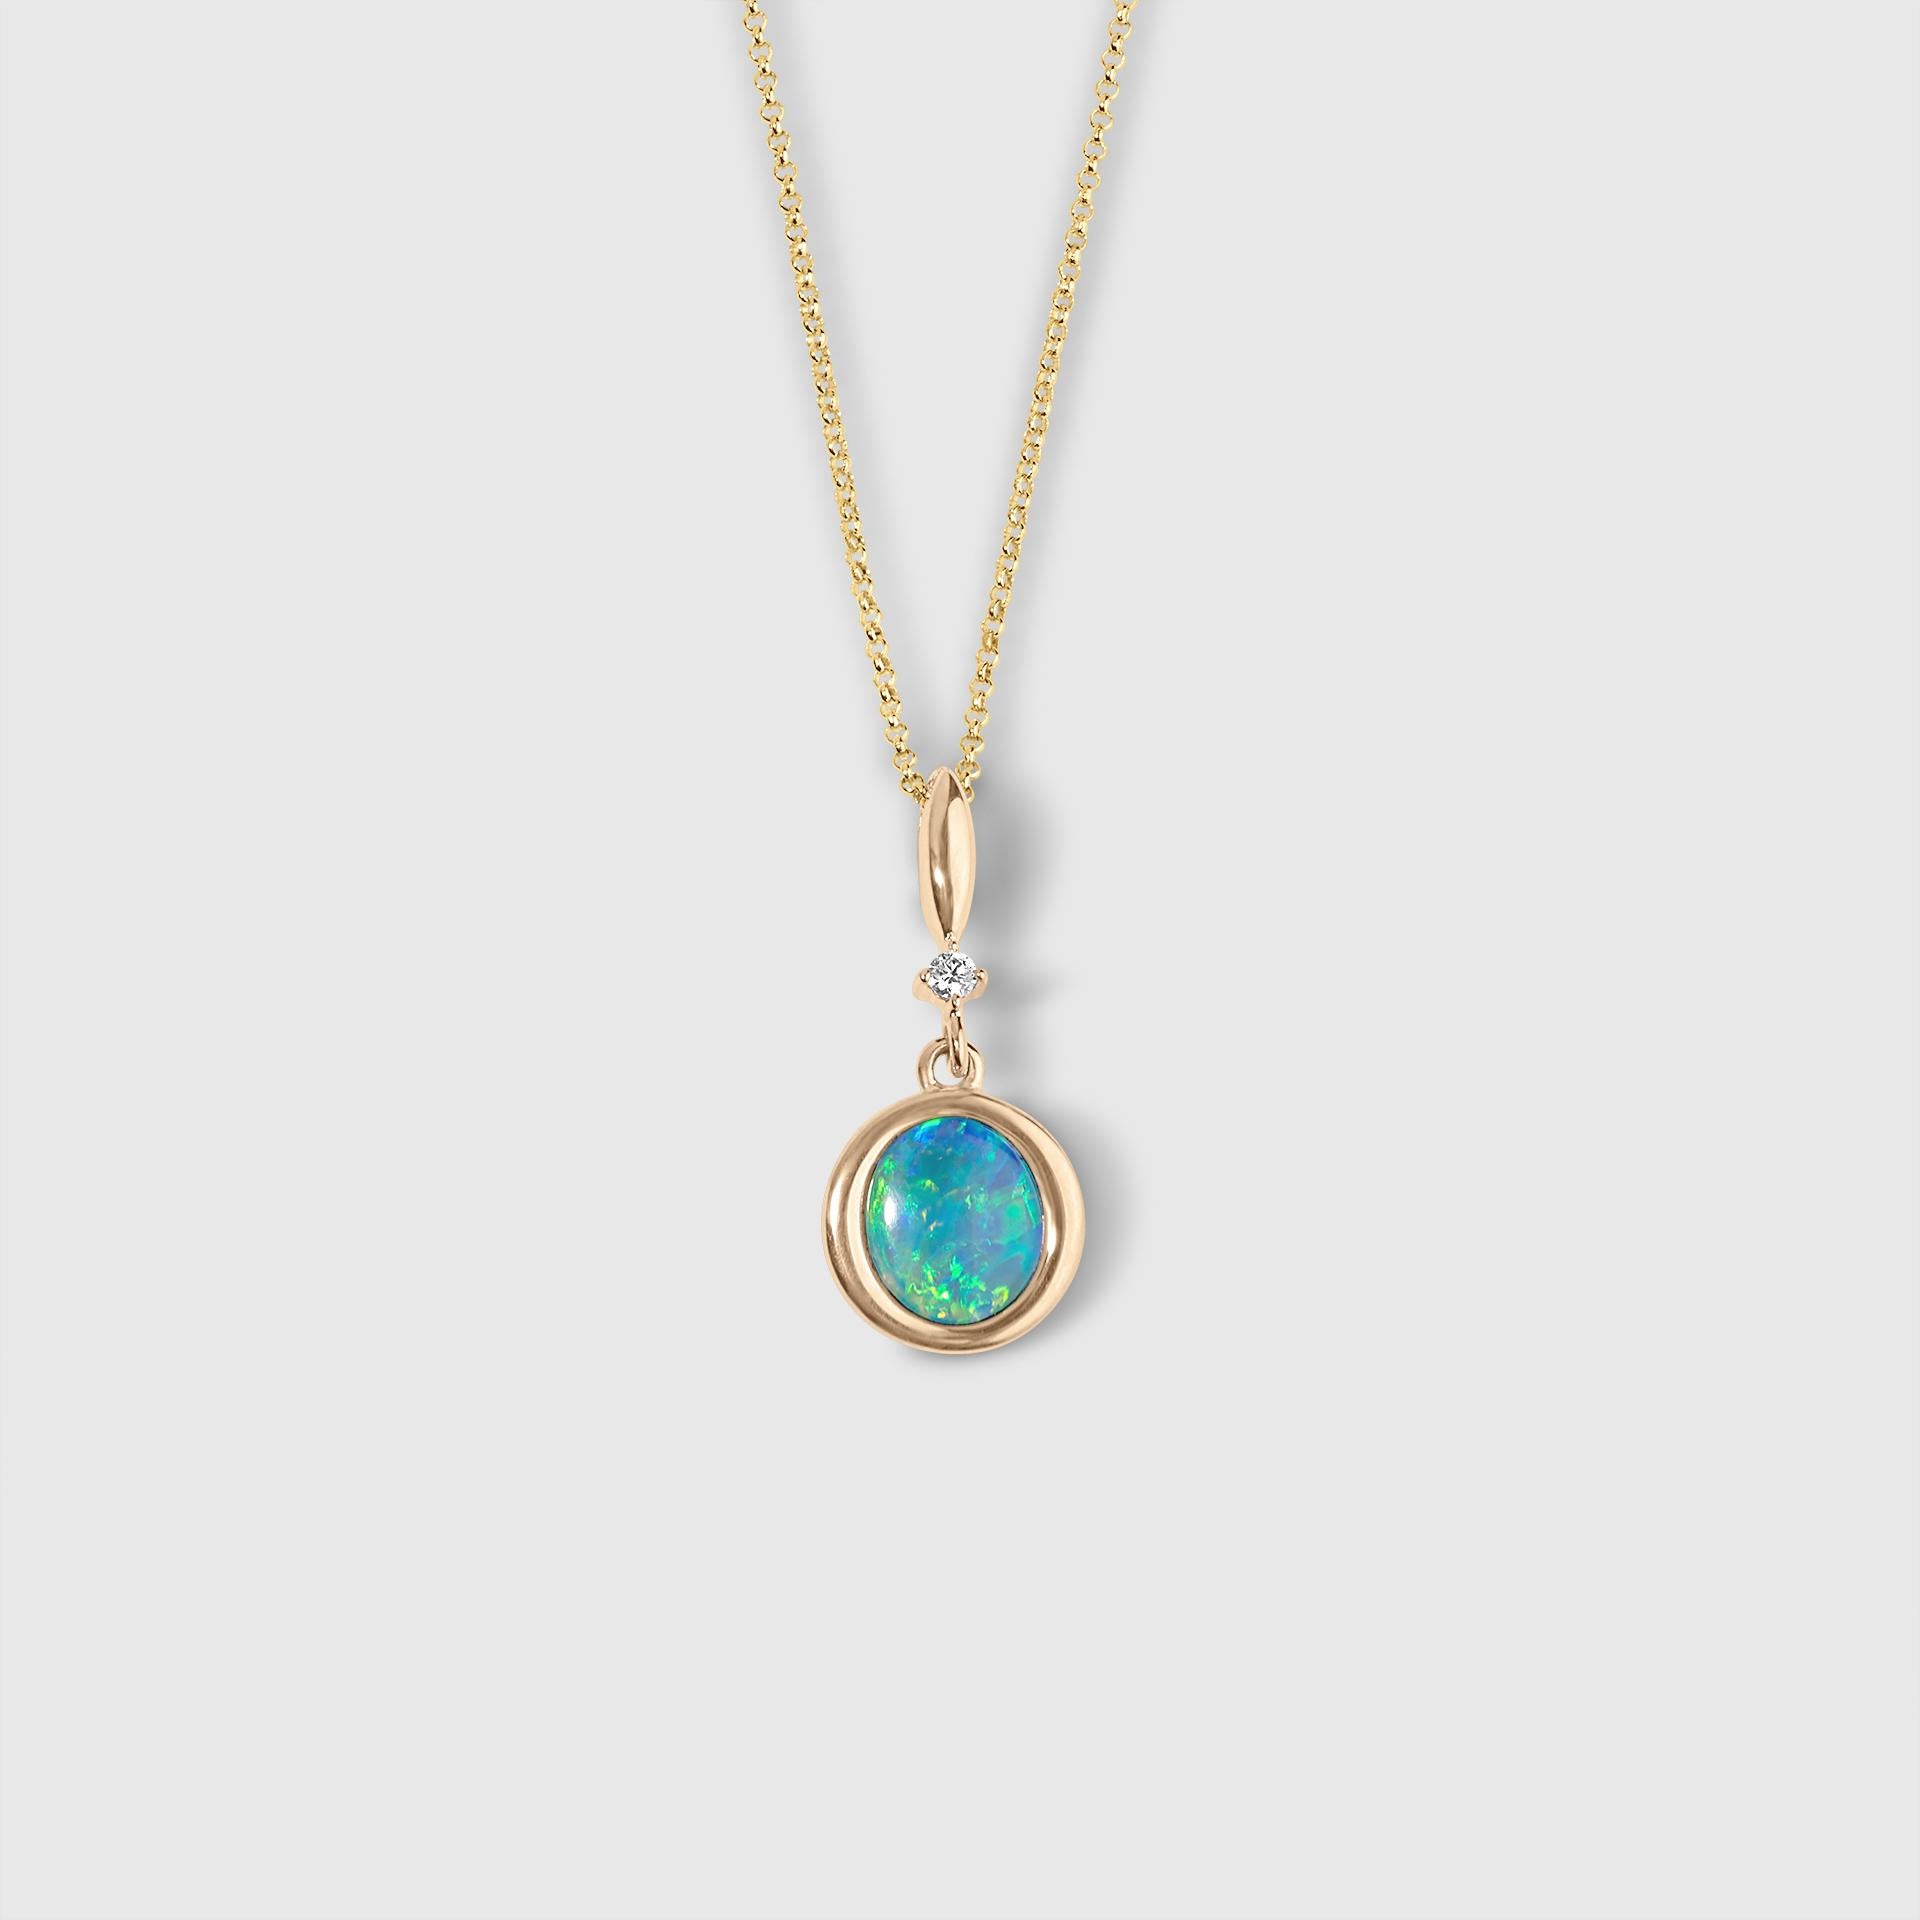 Round, Australian Opal Inlay Pendant Necklace with Diamond, 14kt Gold, 16